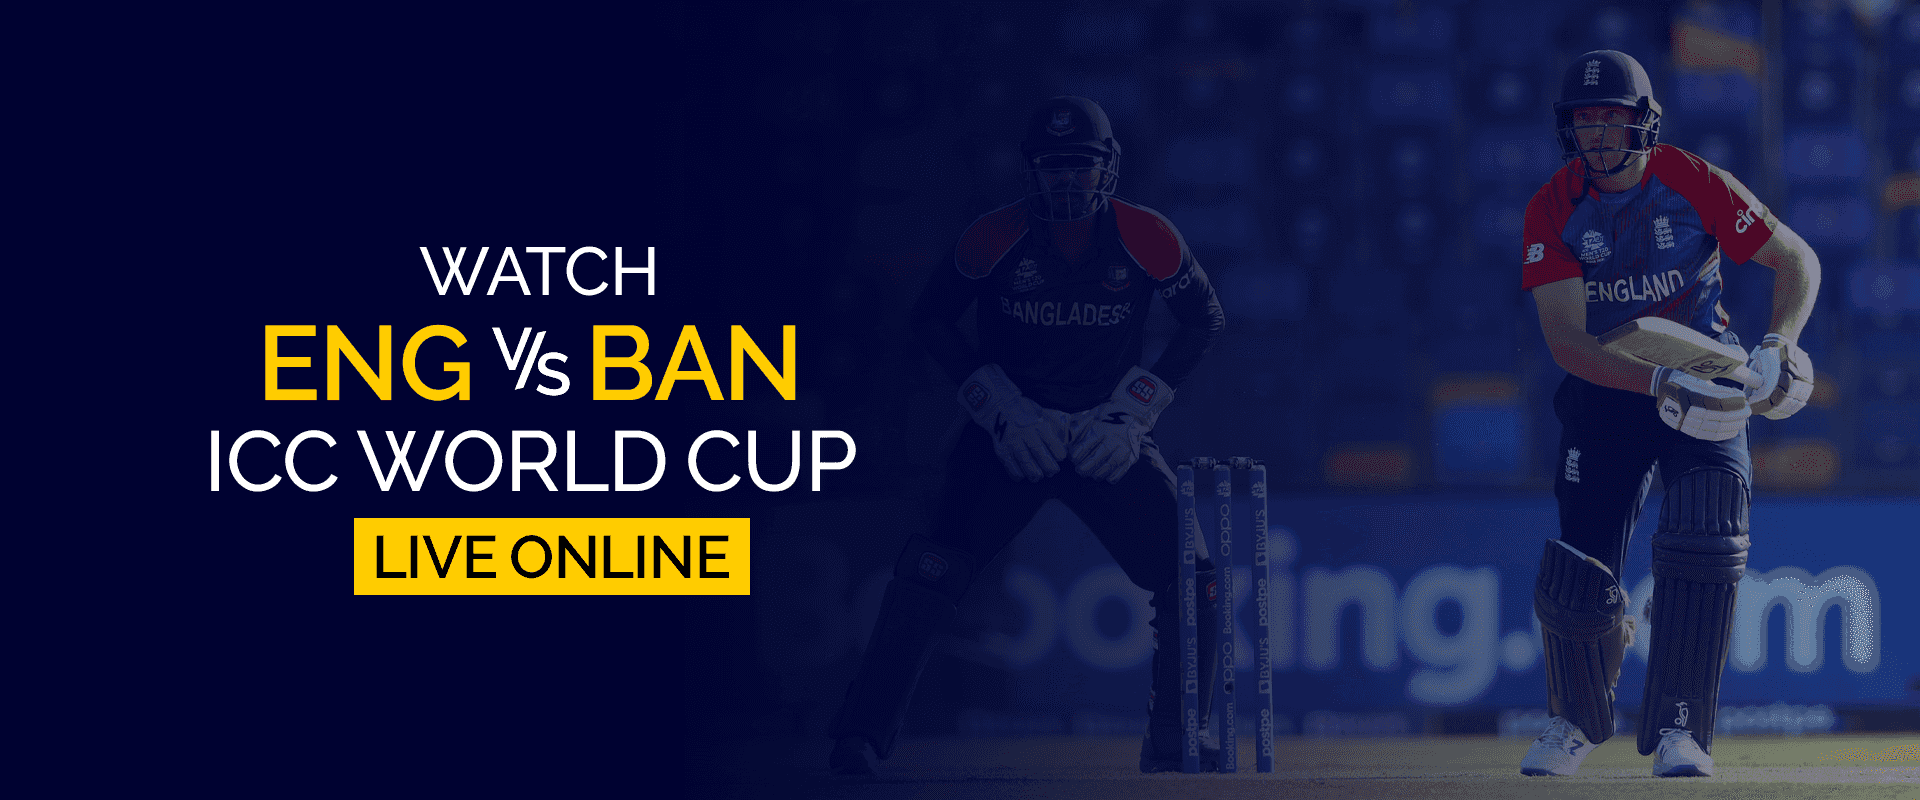 Watch ENG vs BAN ICC World Cup Live Online